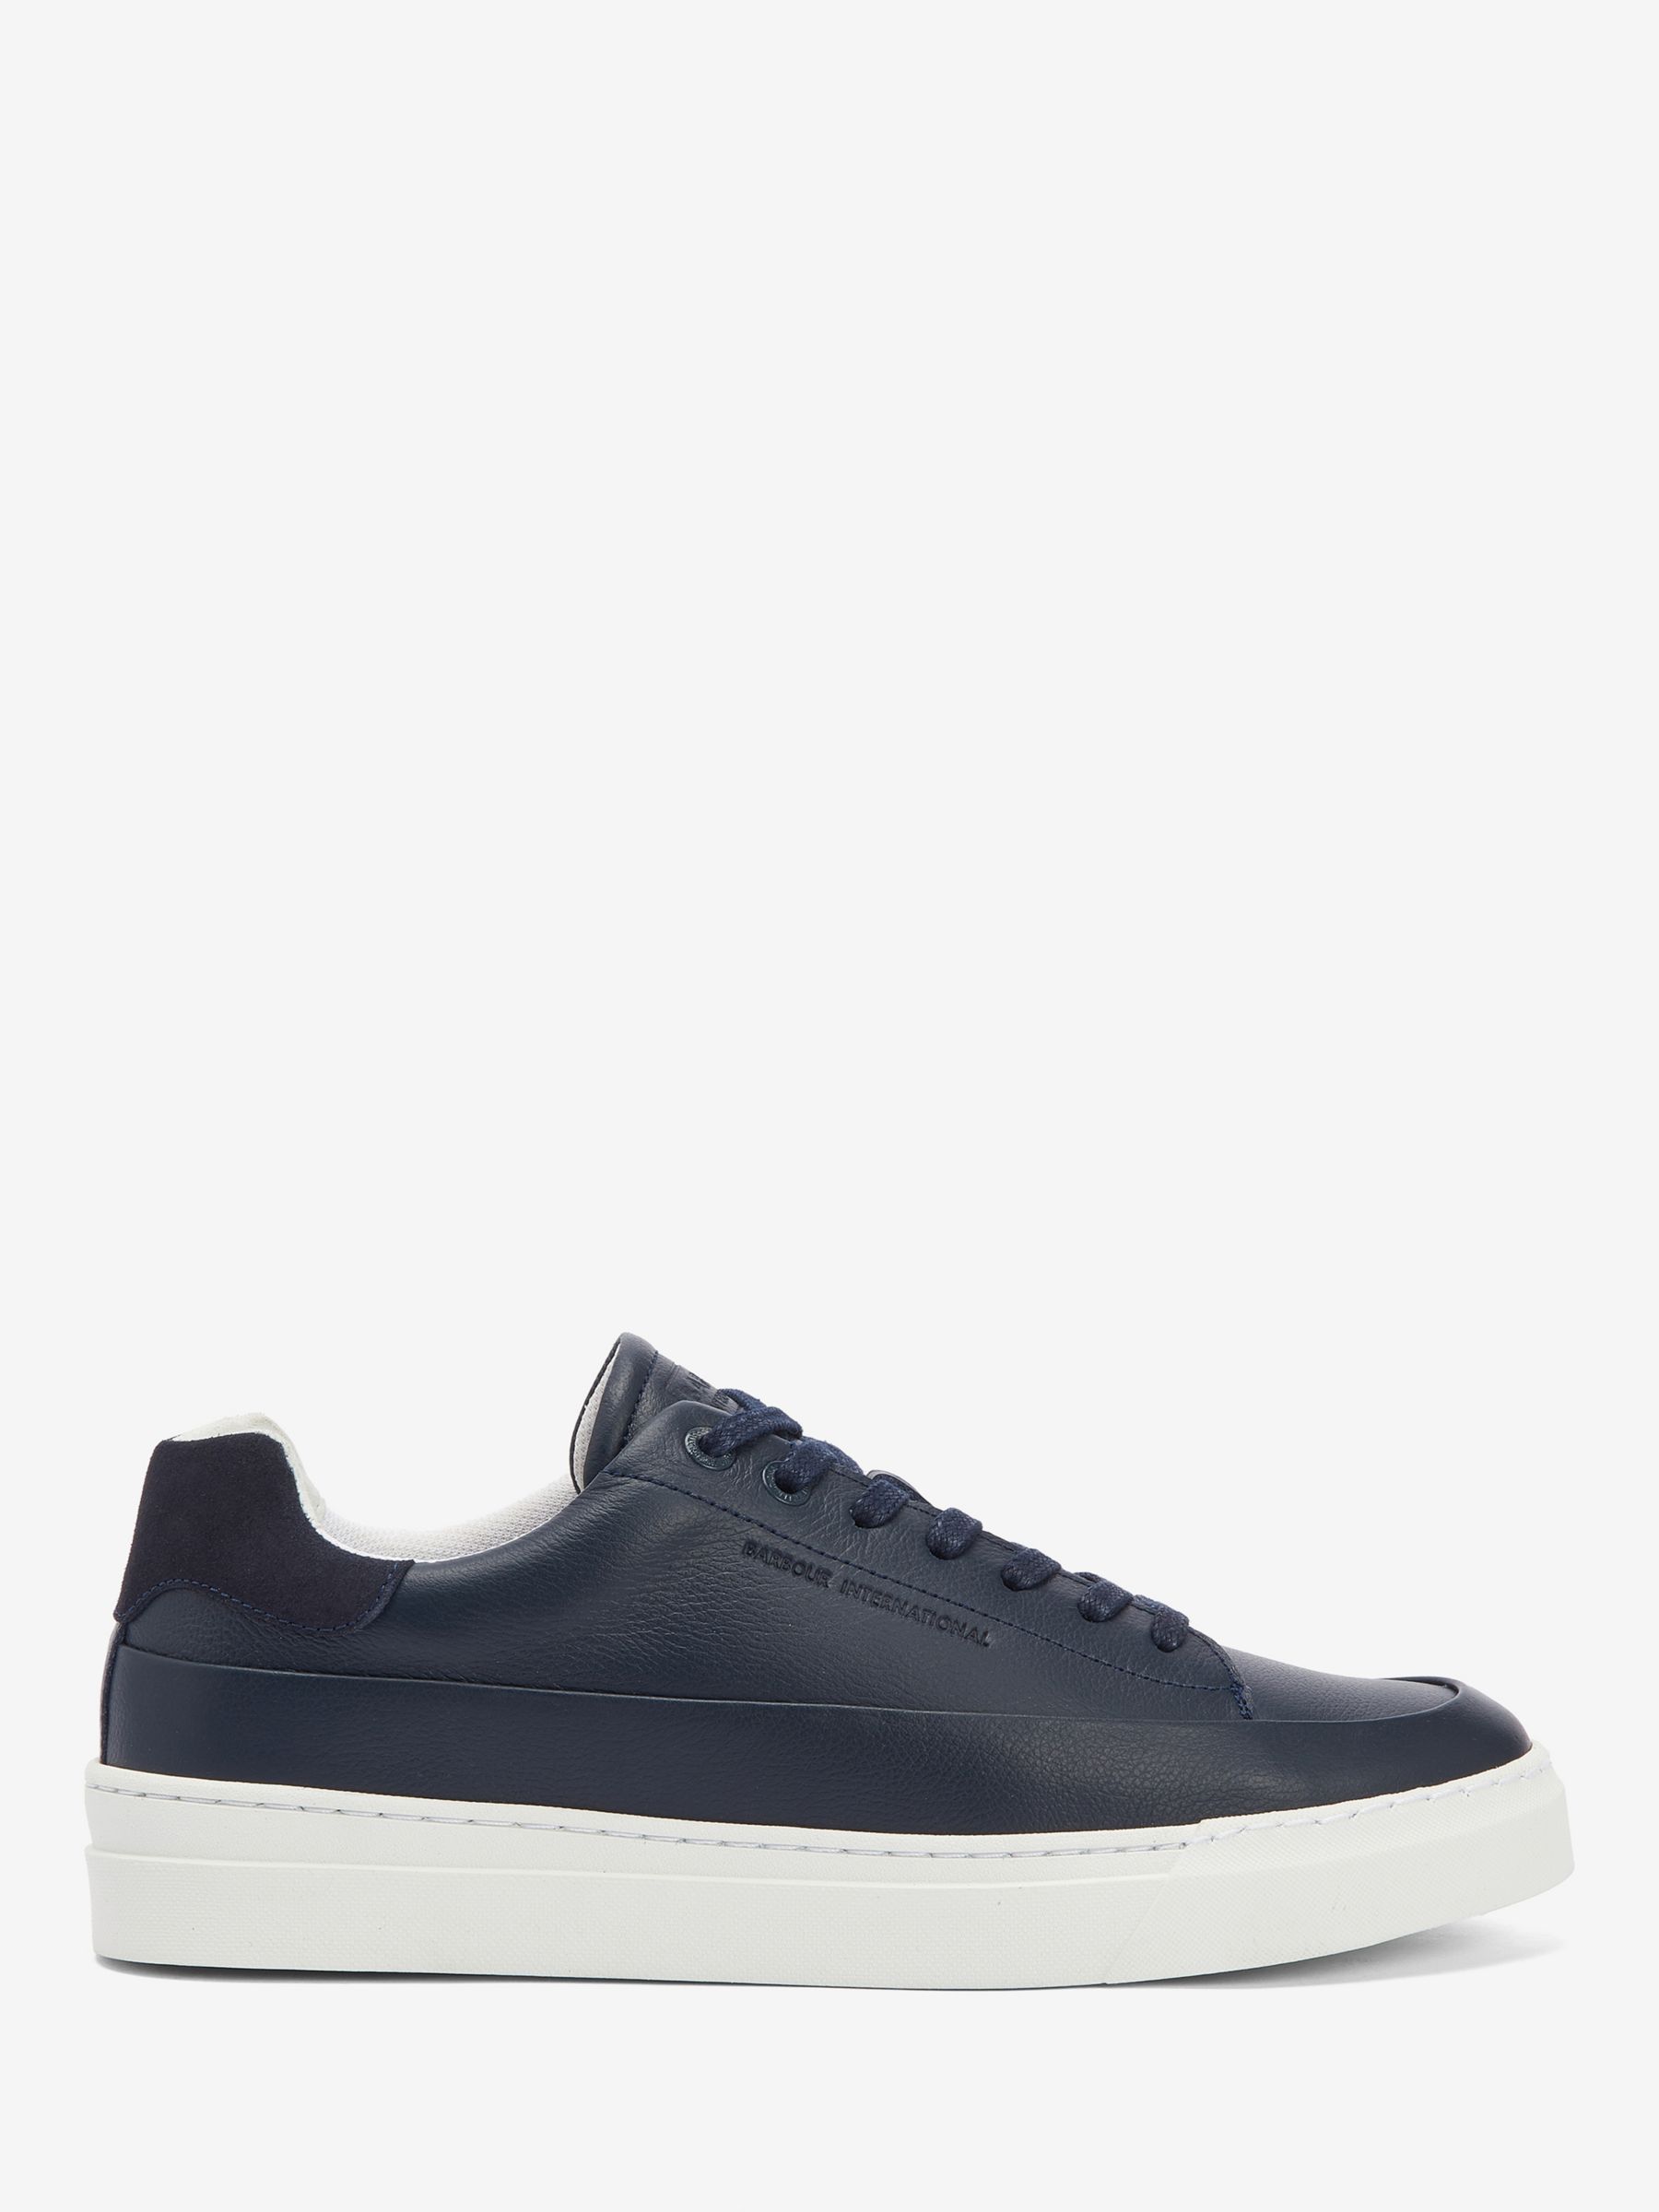 Barbour International Cram Cupsole Trainers, Navy at John Lewis & Partners